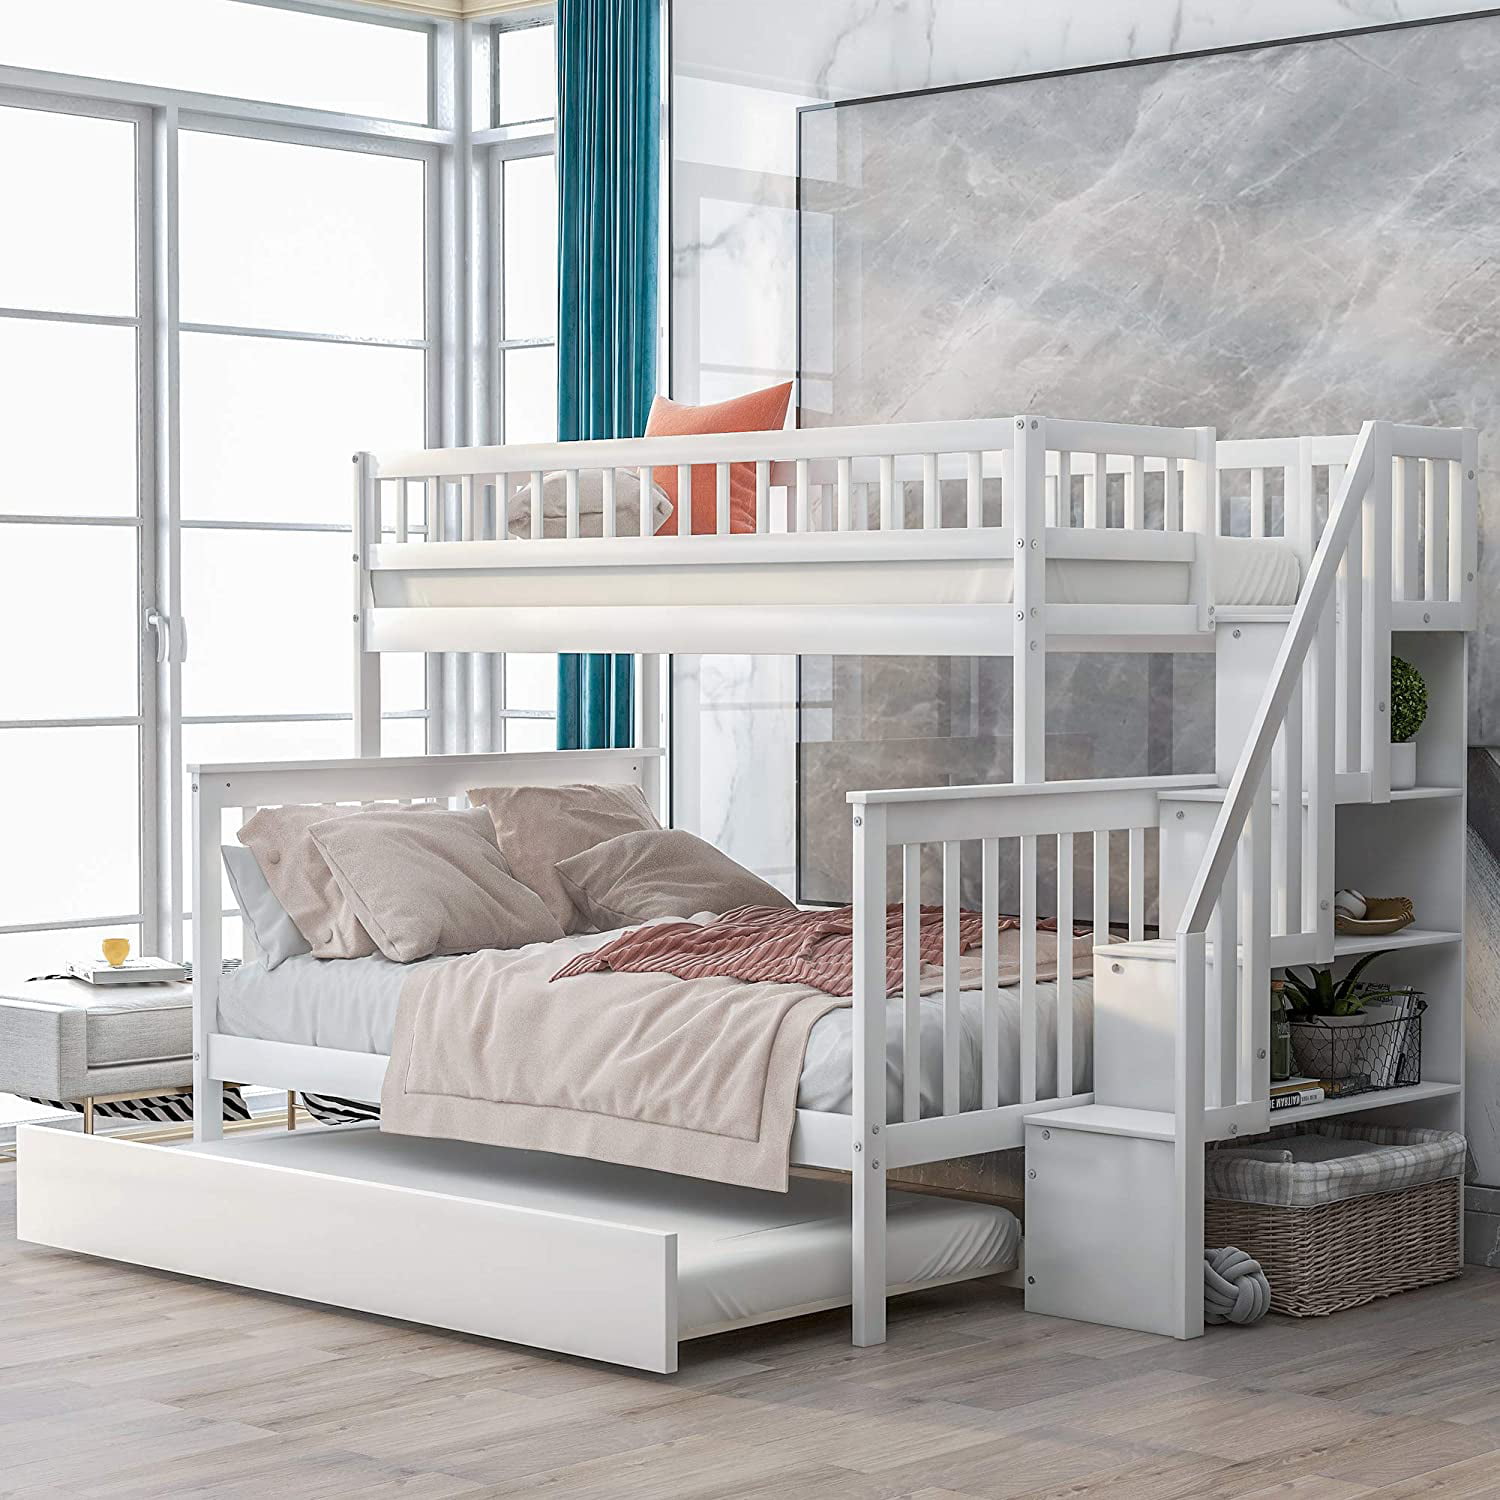 Stairs Solid Wood Bunk Bed Frame, Bunk Bed With Trundle